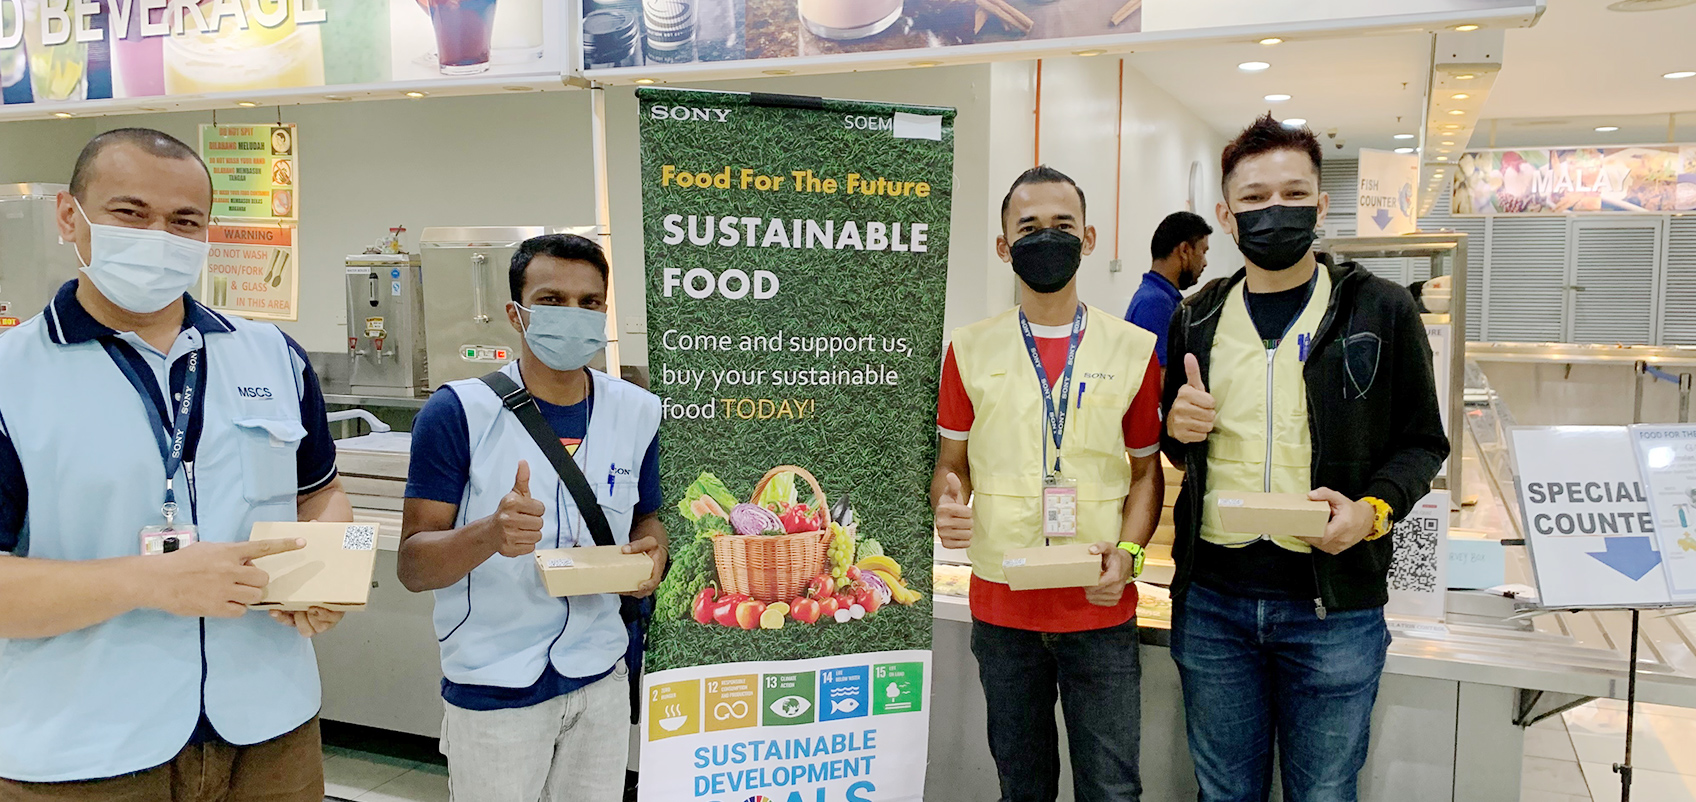 Employees lined up in front of a banner that reads "Sustainable Food"